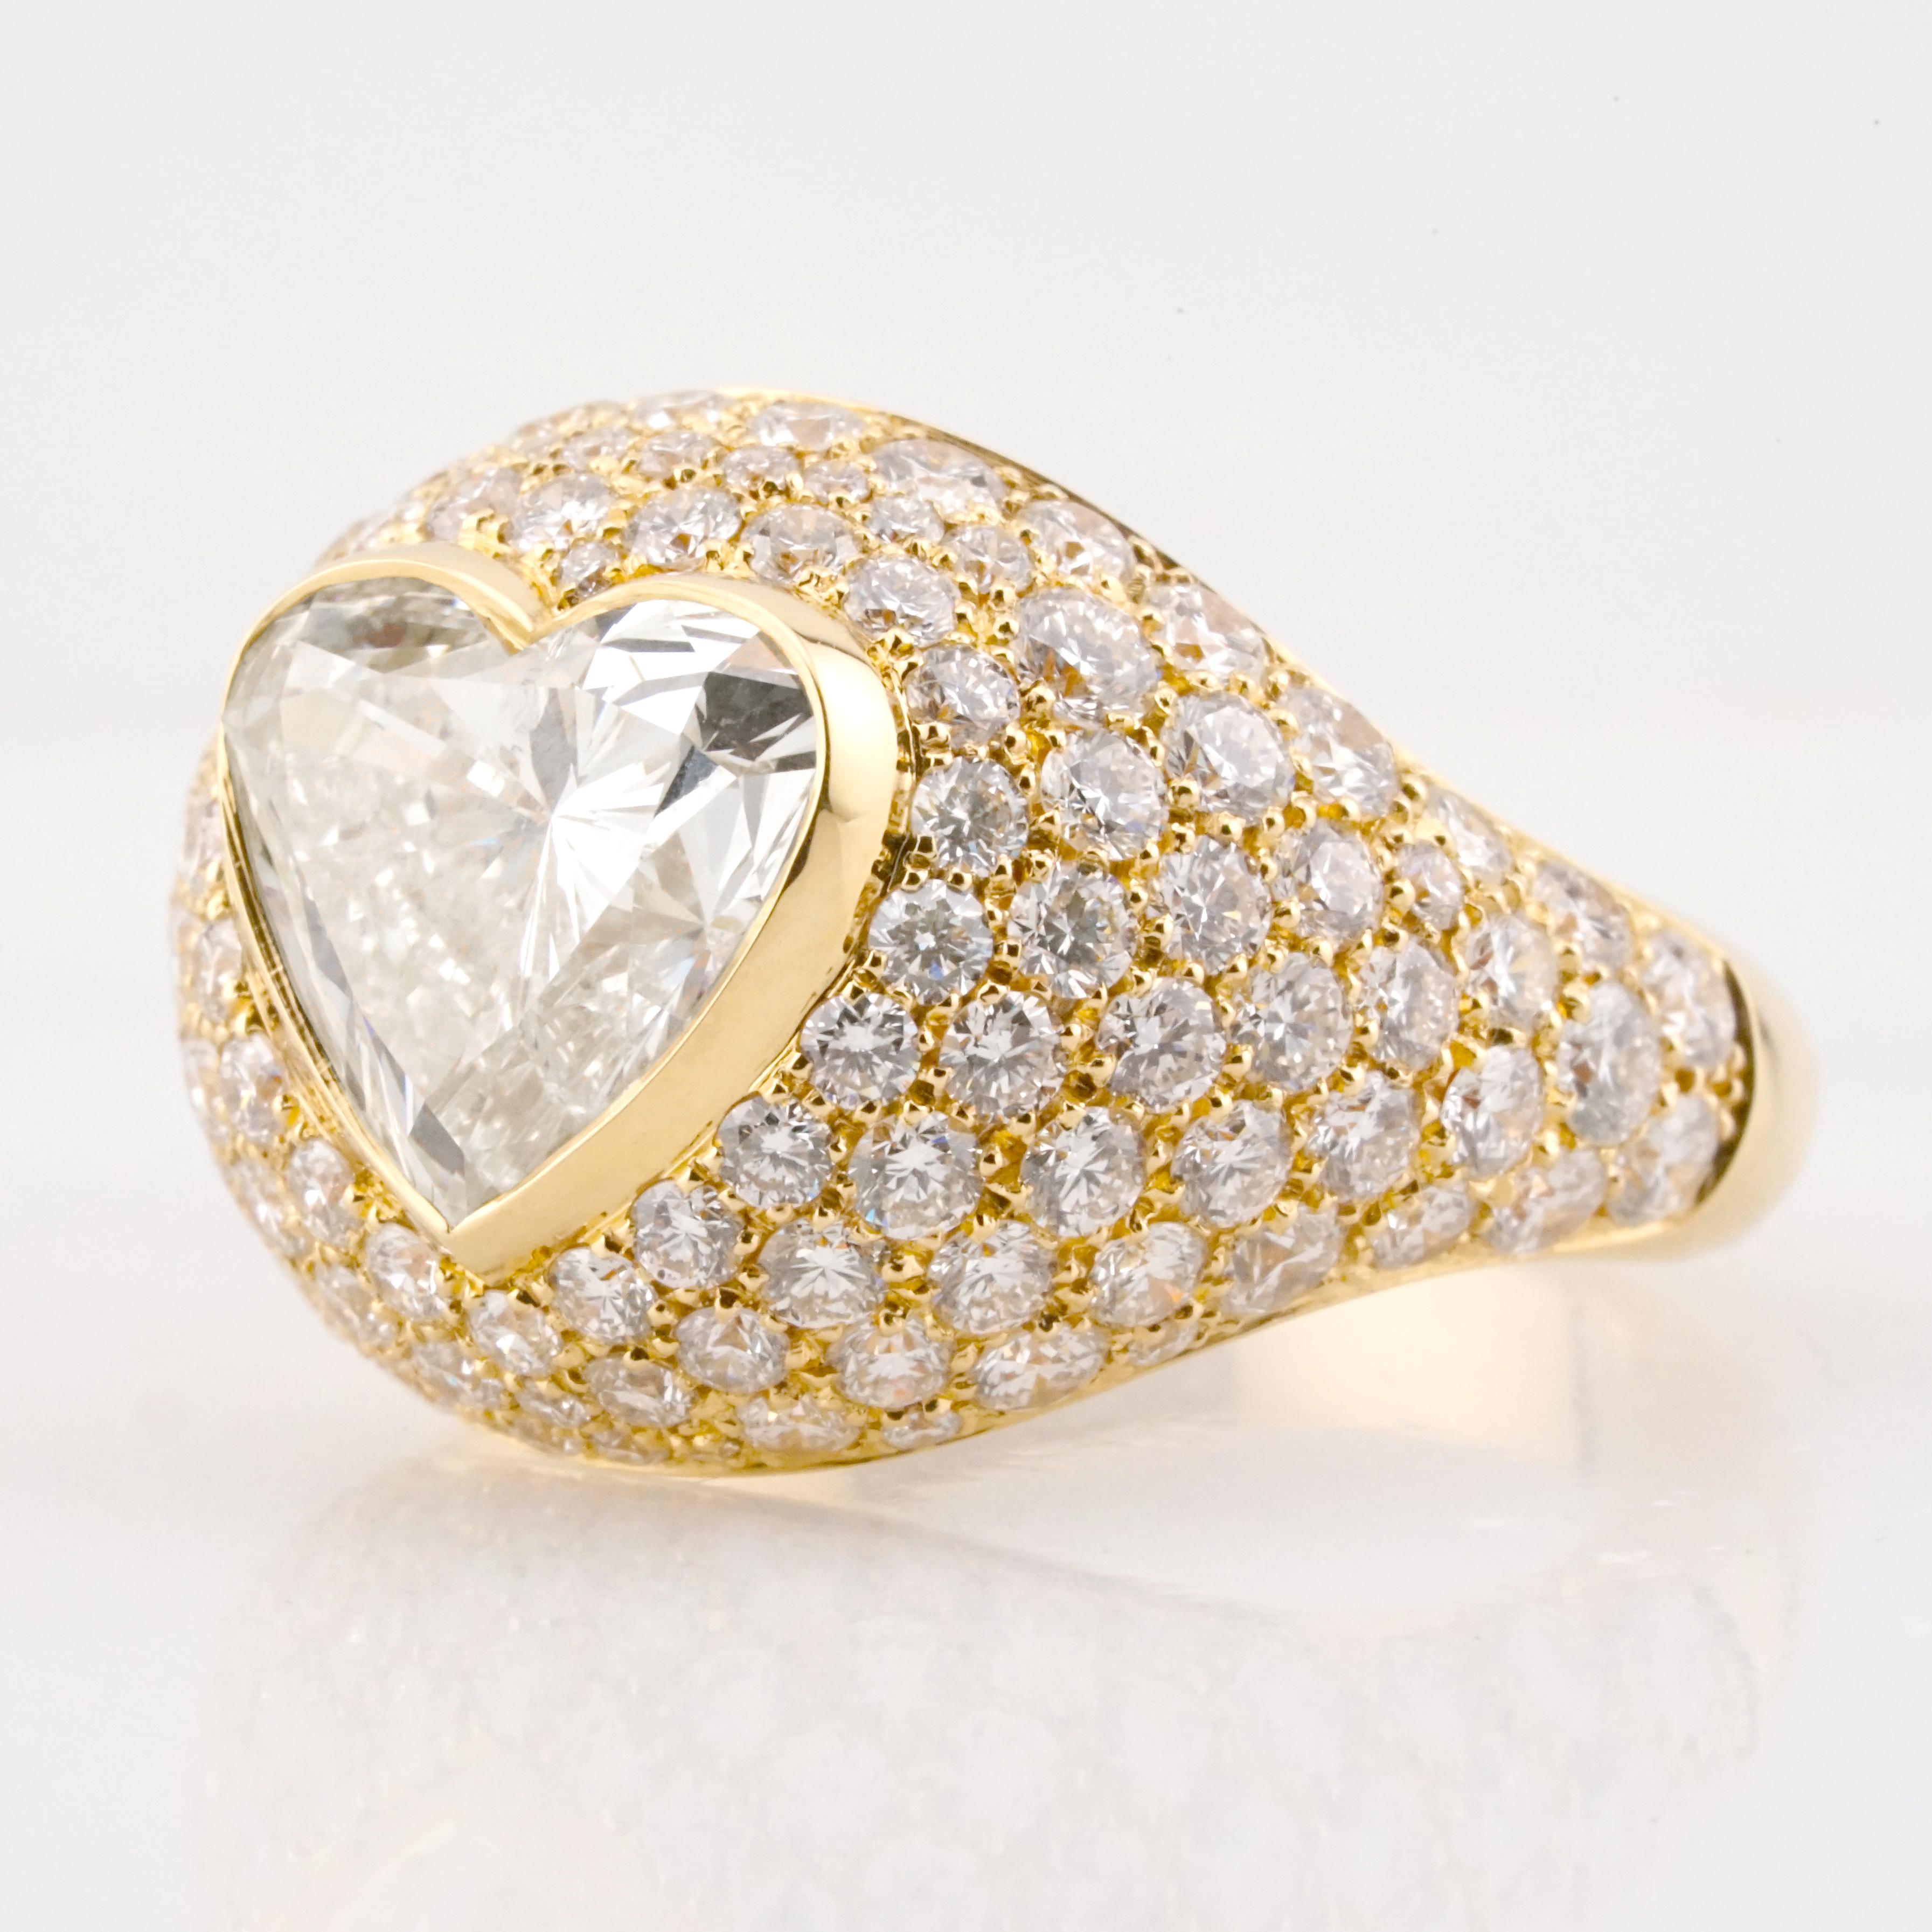 This magnificent 18K yellow gold ring is crowned with a 2.74-carat heart-shaped diamond that radiates with a fiery brilliance, the very symbol of love and devotion. 

Certified by the Gemological Institute of America (GIA), the diamond's clarity and